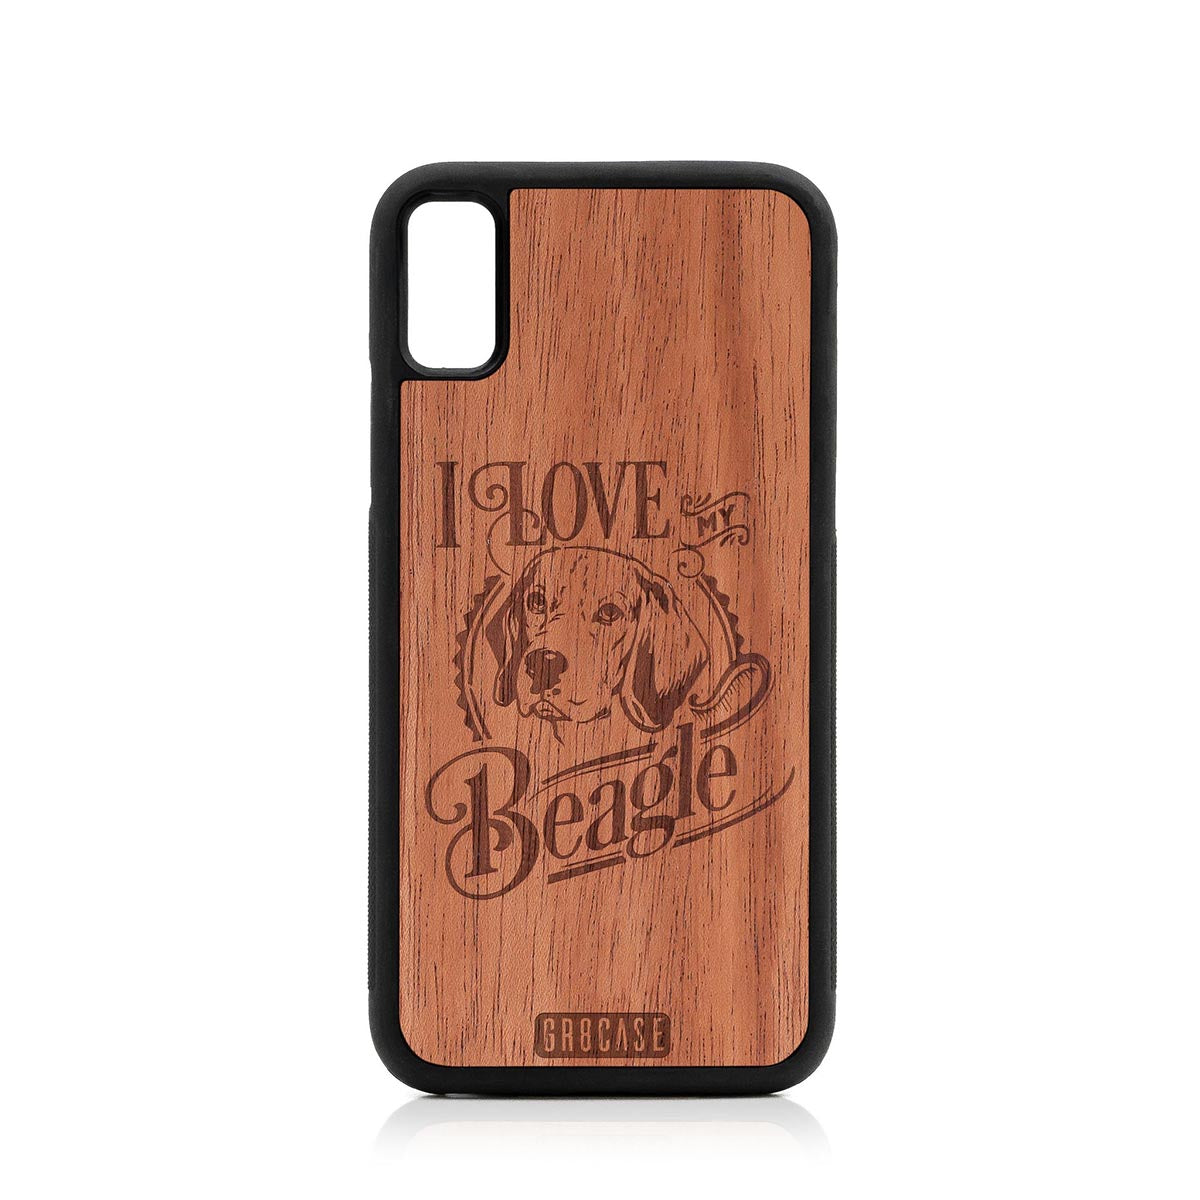 I Love My Beagle Design Wood Case For iPhone XR by GR8CASE